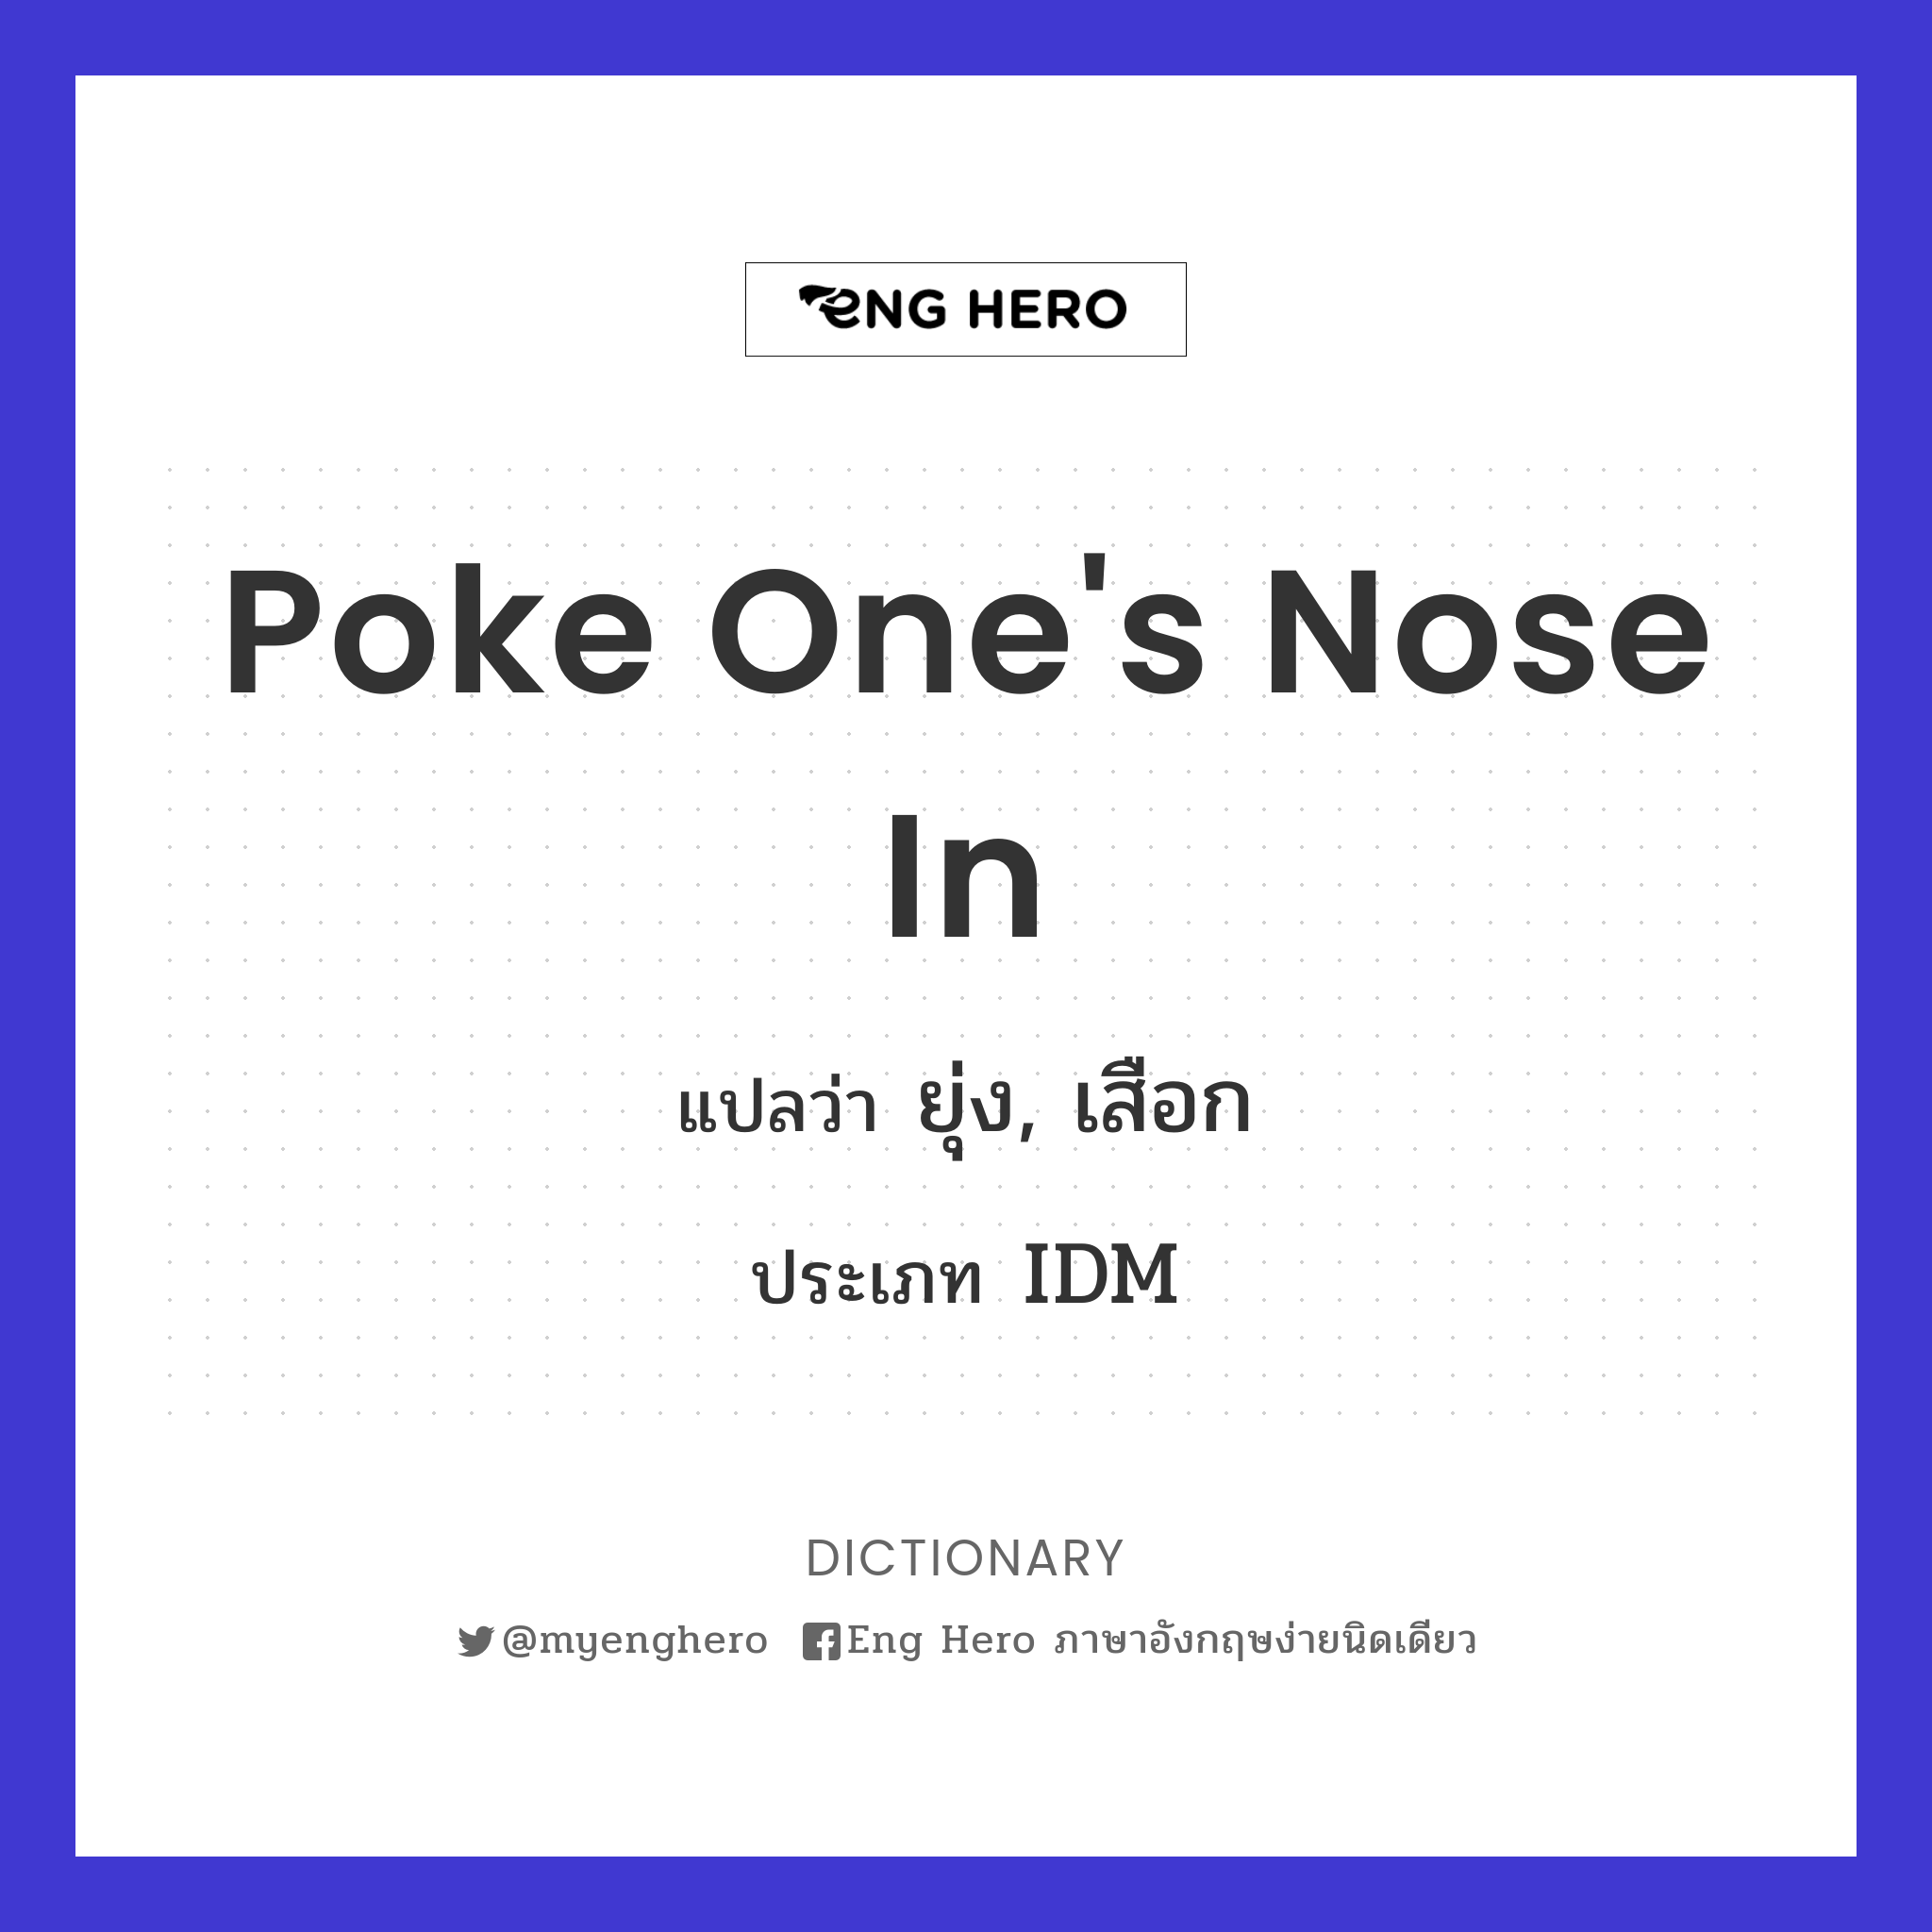 poke one's nose in